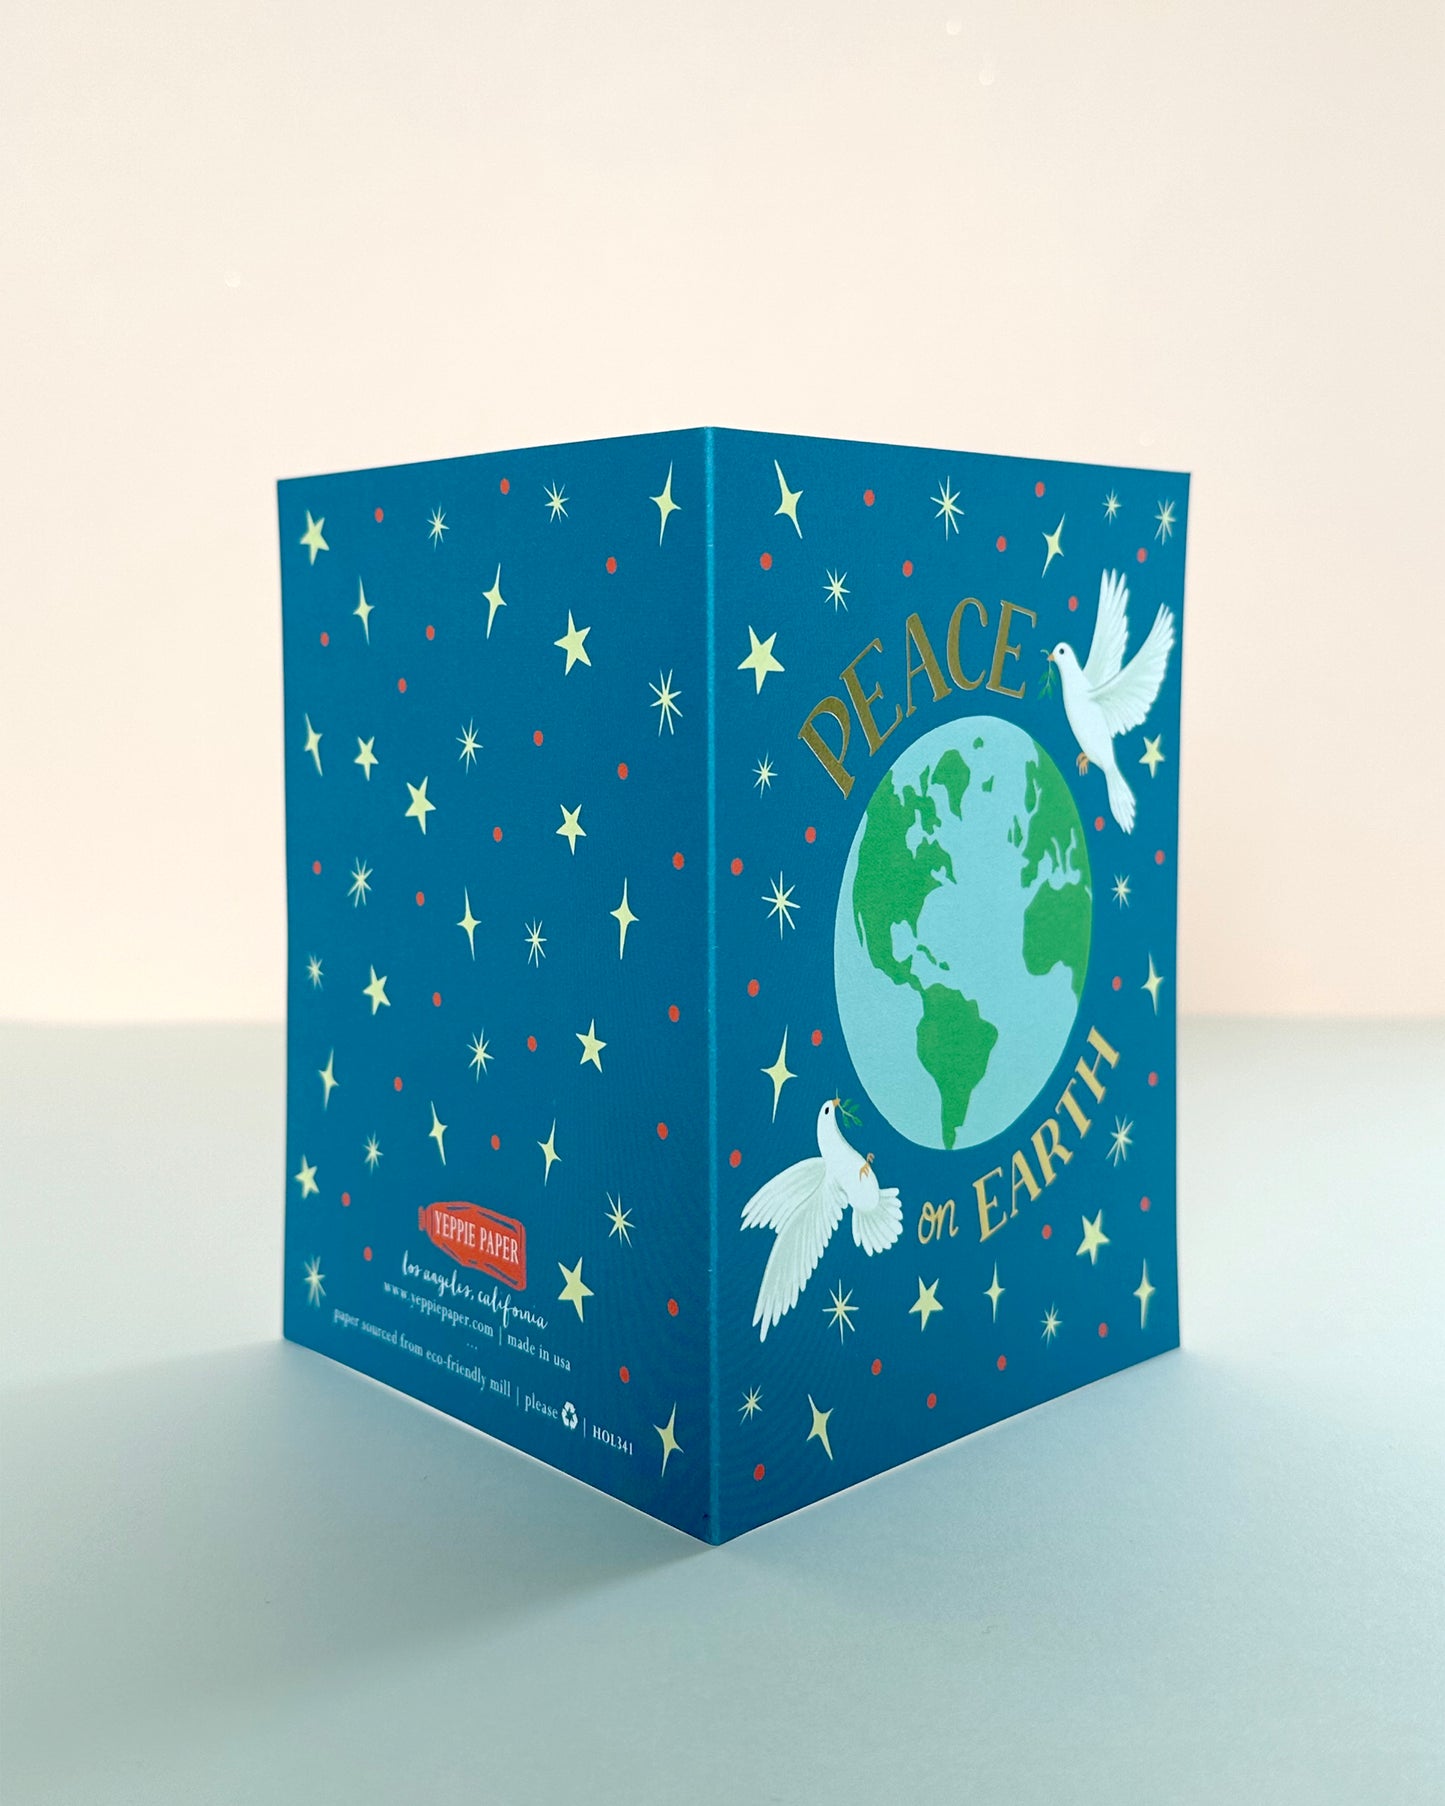 PEACE ON EARTH - HOLIDAY GREETING CARD